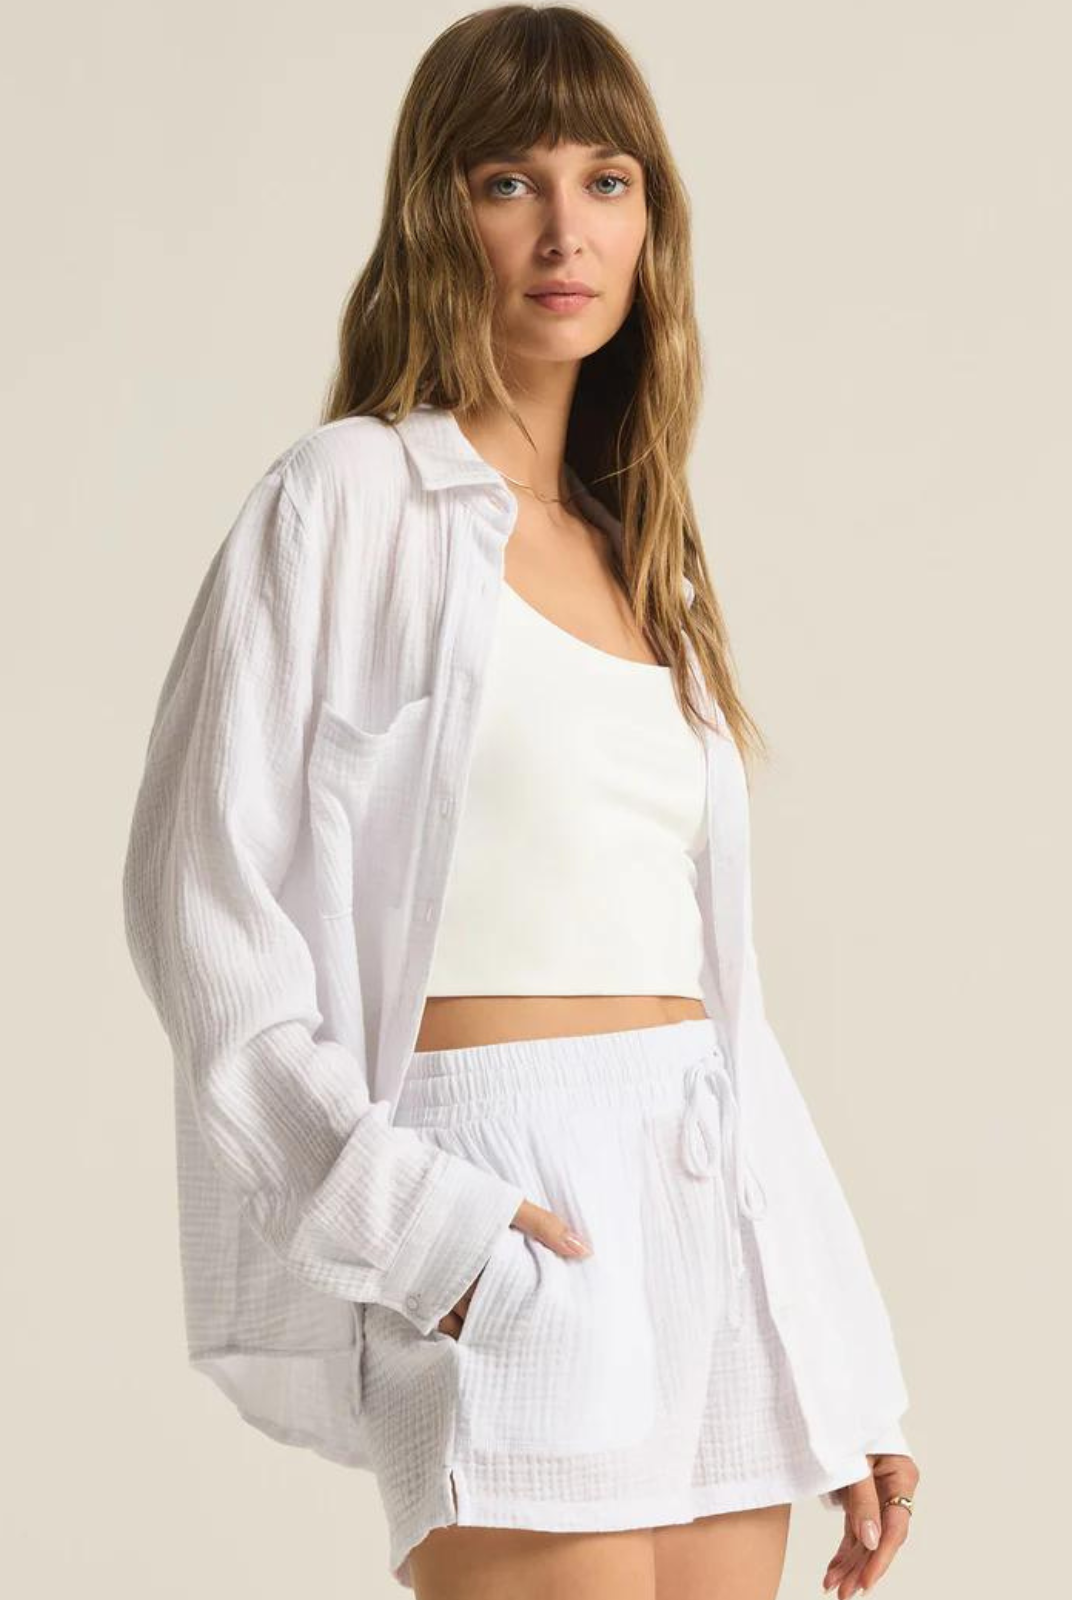 Z Supply Kaili Button Up Gauze Top- White. Meet the dressier side of gauze. This button up gauze top can be worn day to night, and features a relaxed fit with front pockets.